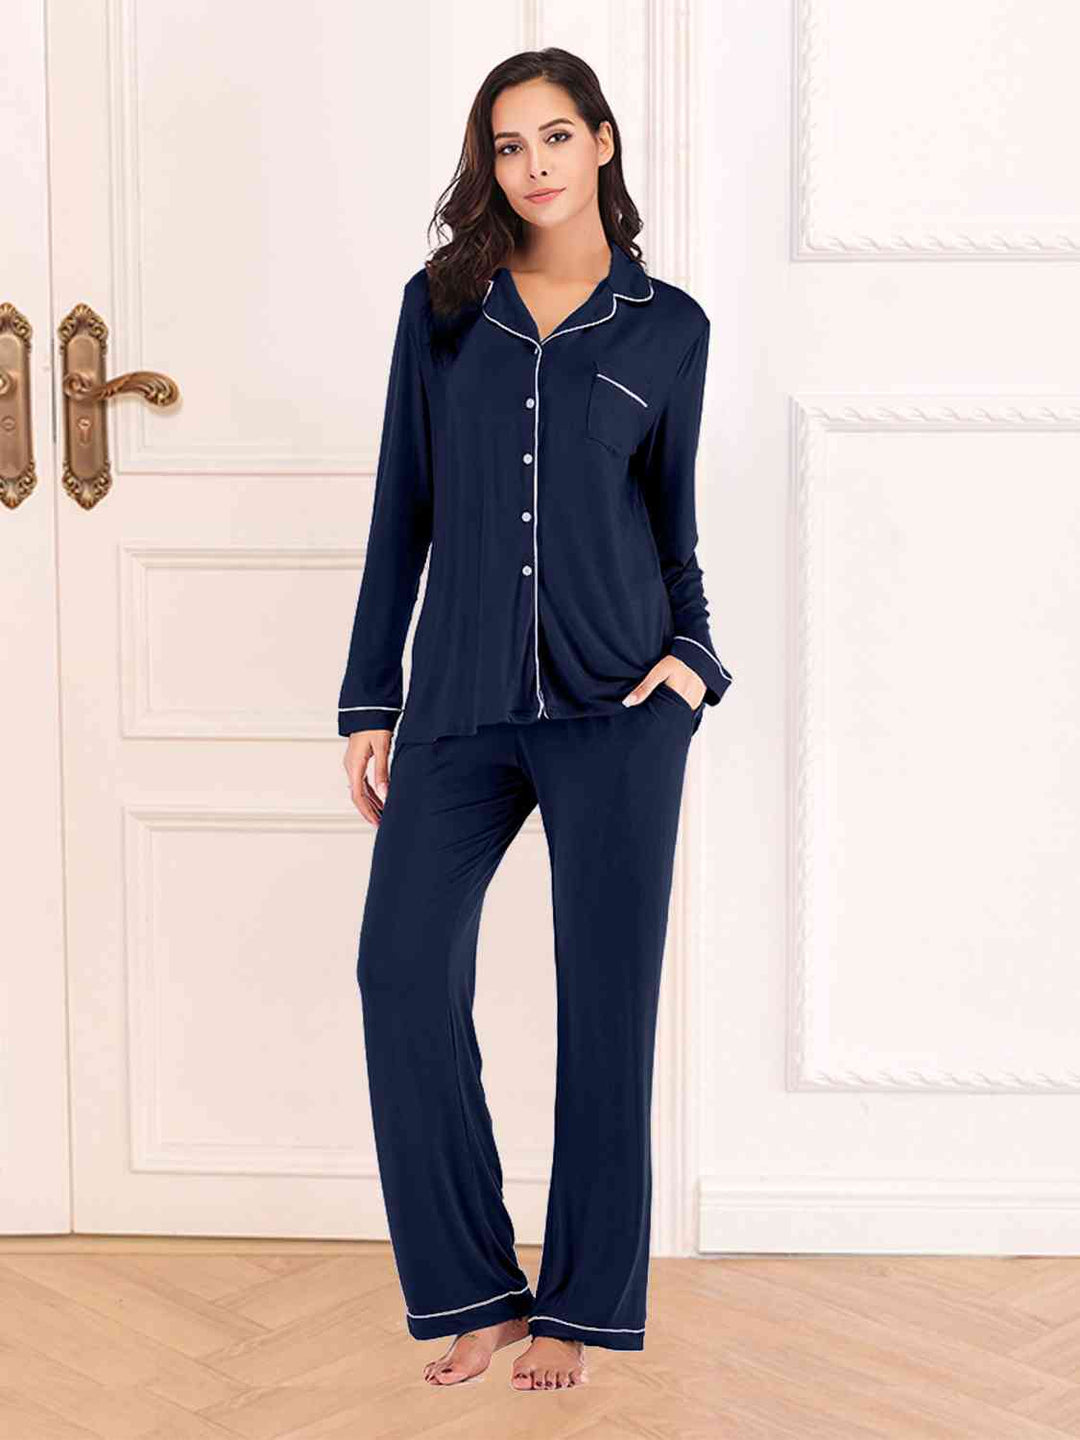 Collared Neck Long Sleeve Loungewear Set with Pockets -  - Wild Willows Boutique - Massapequa, NY, affordable and fashionable clothing for women of all ages. Bottoms, tops, dresses, intimates, outerwear, sweater, shoes, accessories, jewelry, active wear, and more // Wild Willow Boutique.